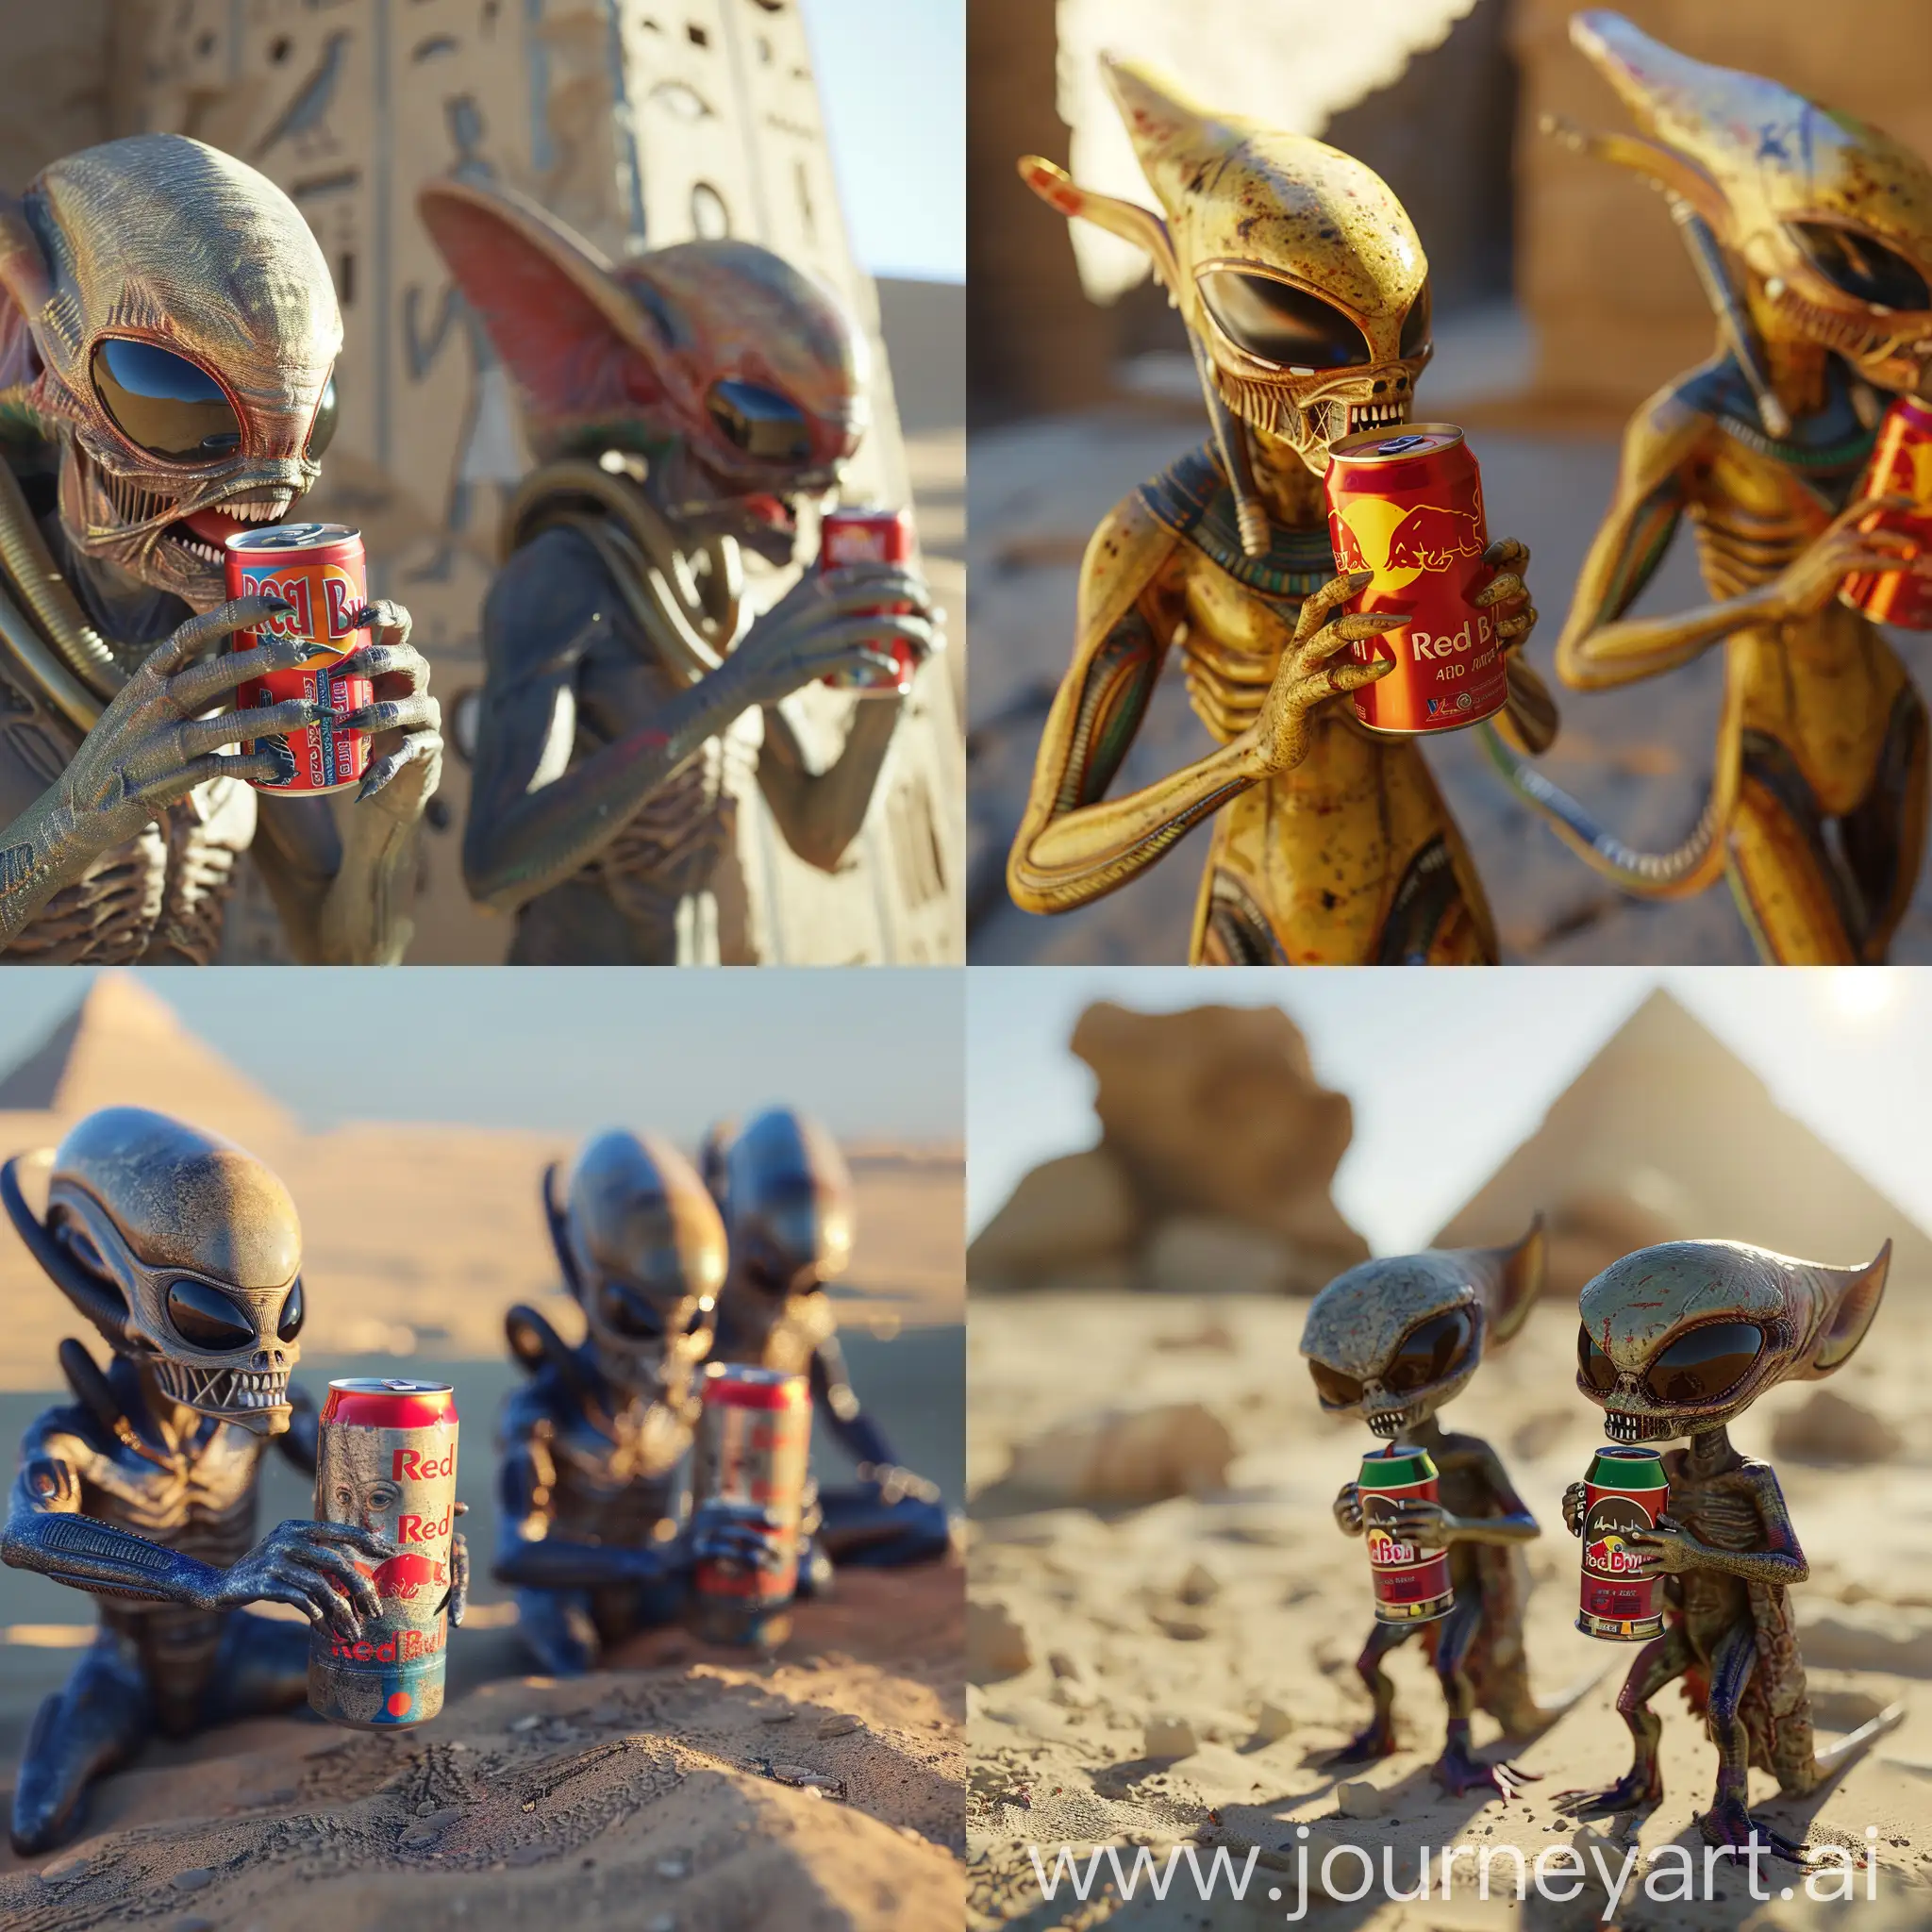 Extraterrestrial-Energizing-in-Ancient-Egypt-Alien-Encounters-and-Red-Bull-Revelry-in-4K-3D